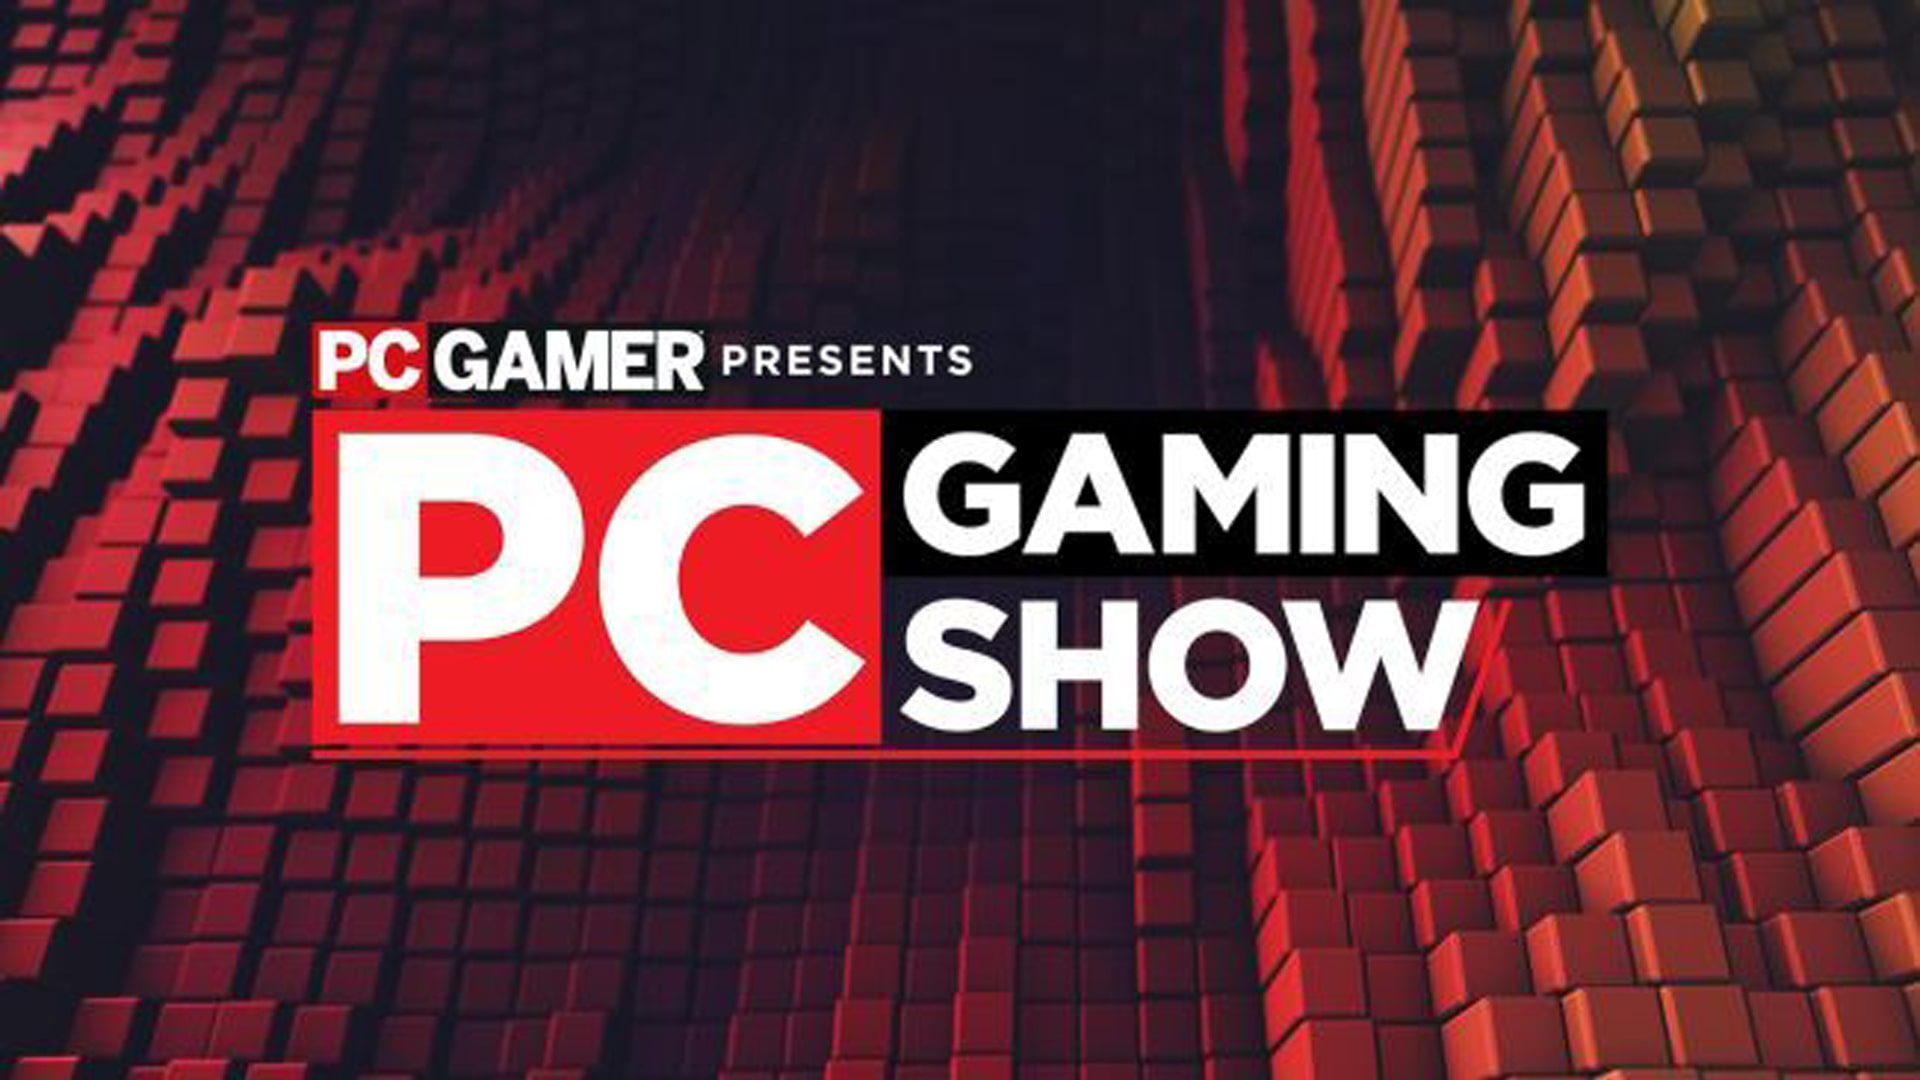 PC Gaming Show 2020 logo surrounded by gaming accessories